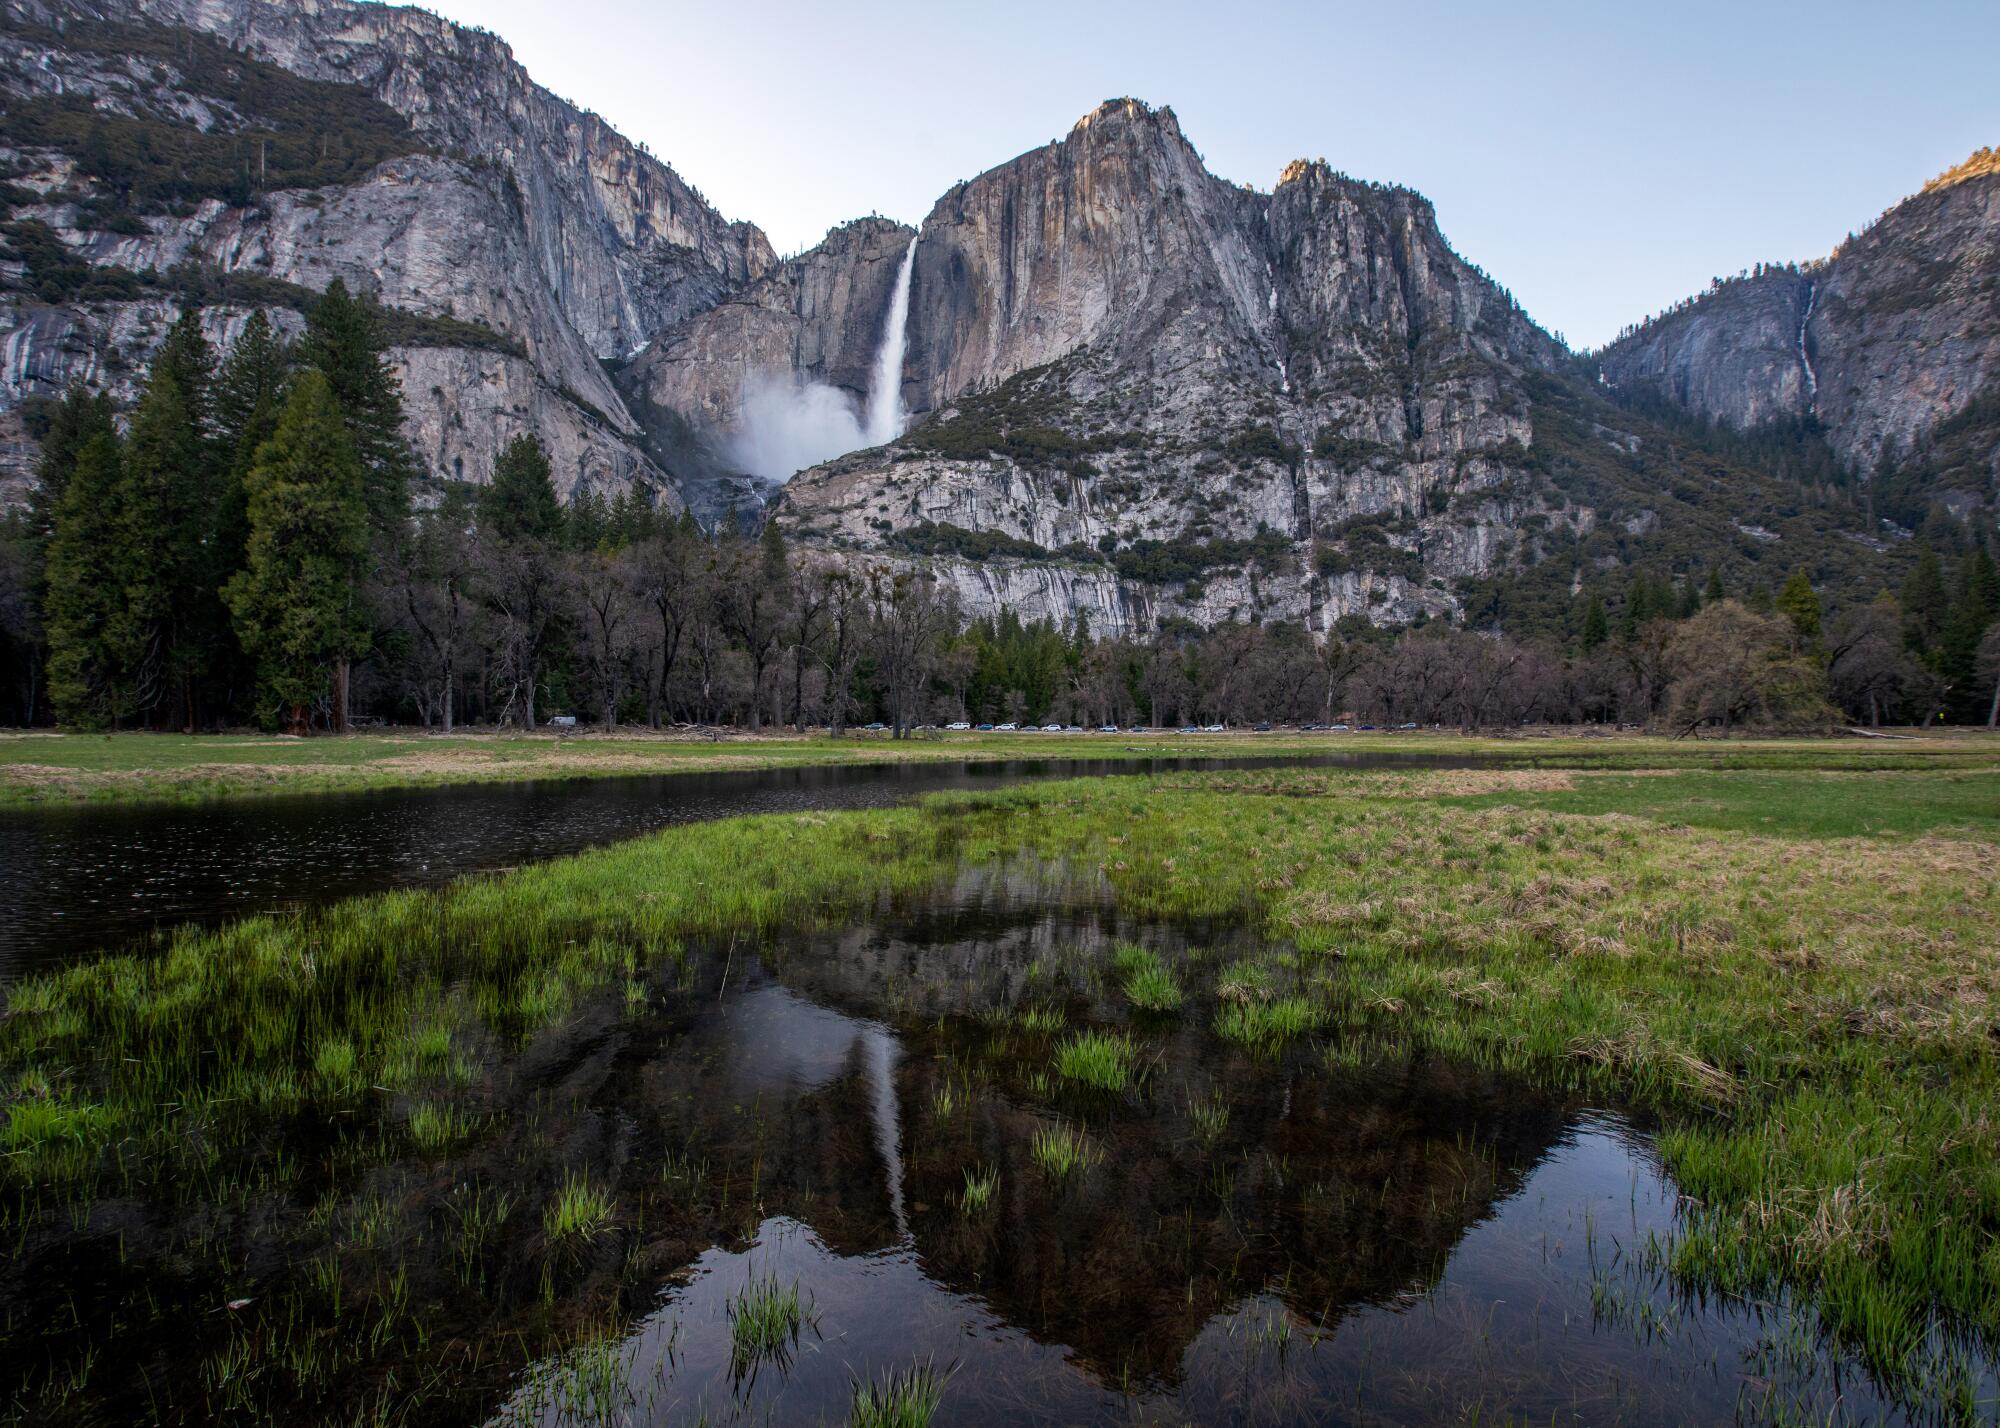 A horizontal frame of a waterfall and its reflection in a puddle  in Yosemite Valley